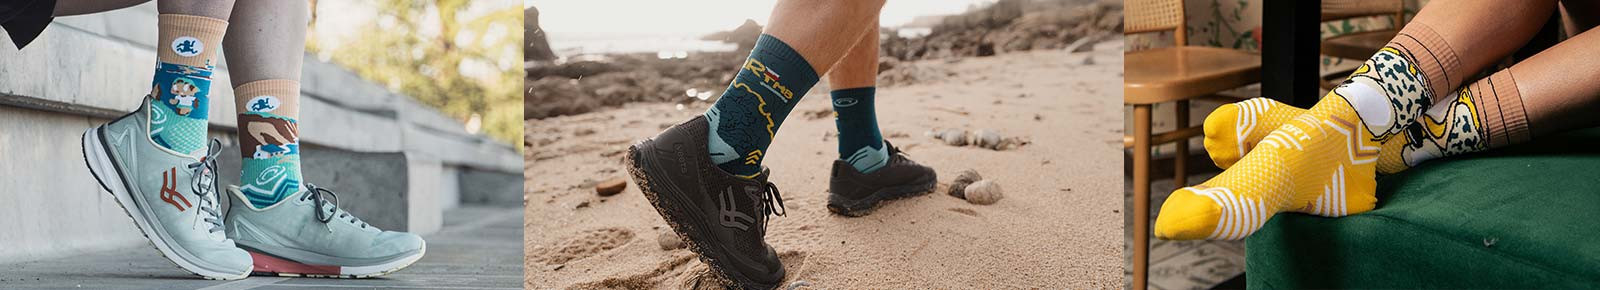 Chaussettes pour le Running, Trail, Cycle, Multisports | BV SPORT